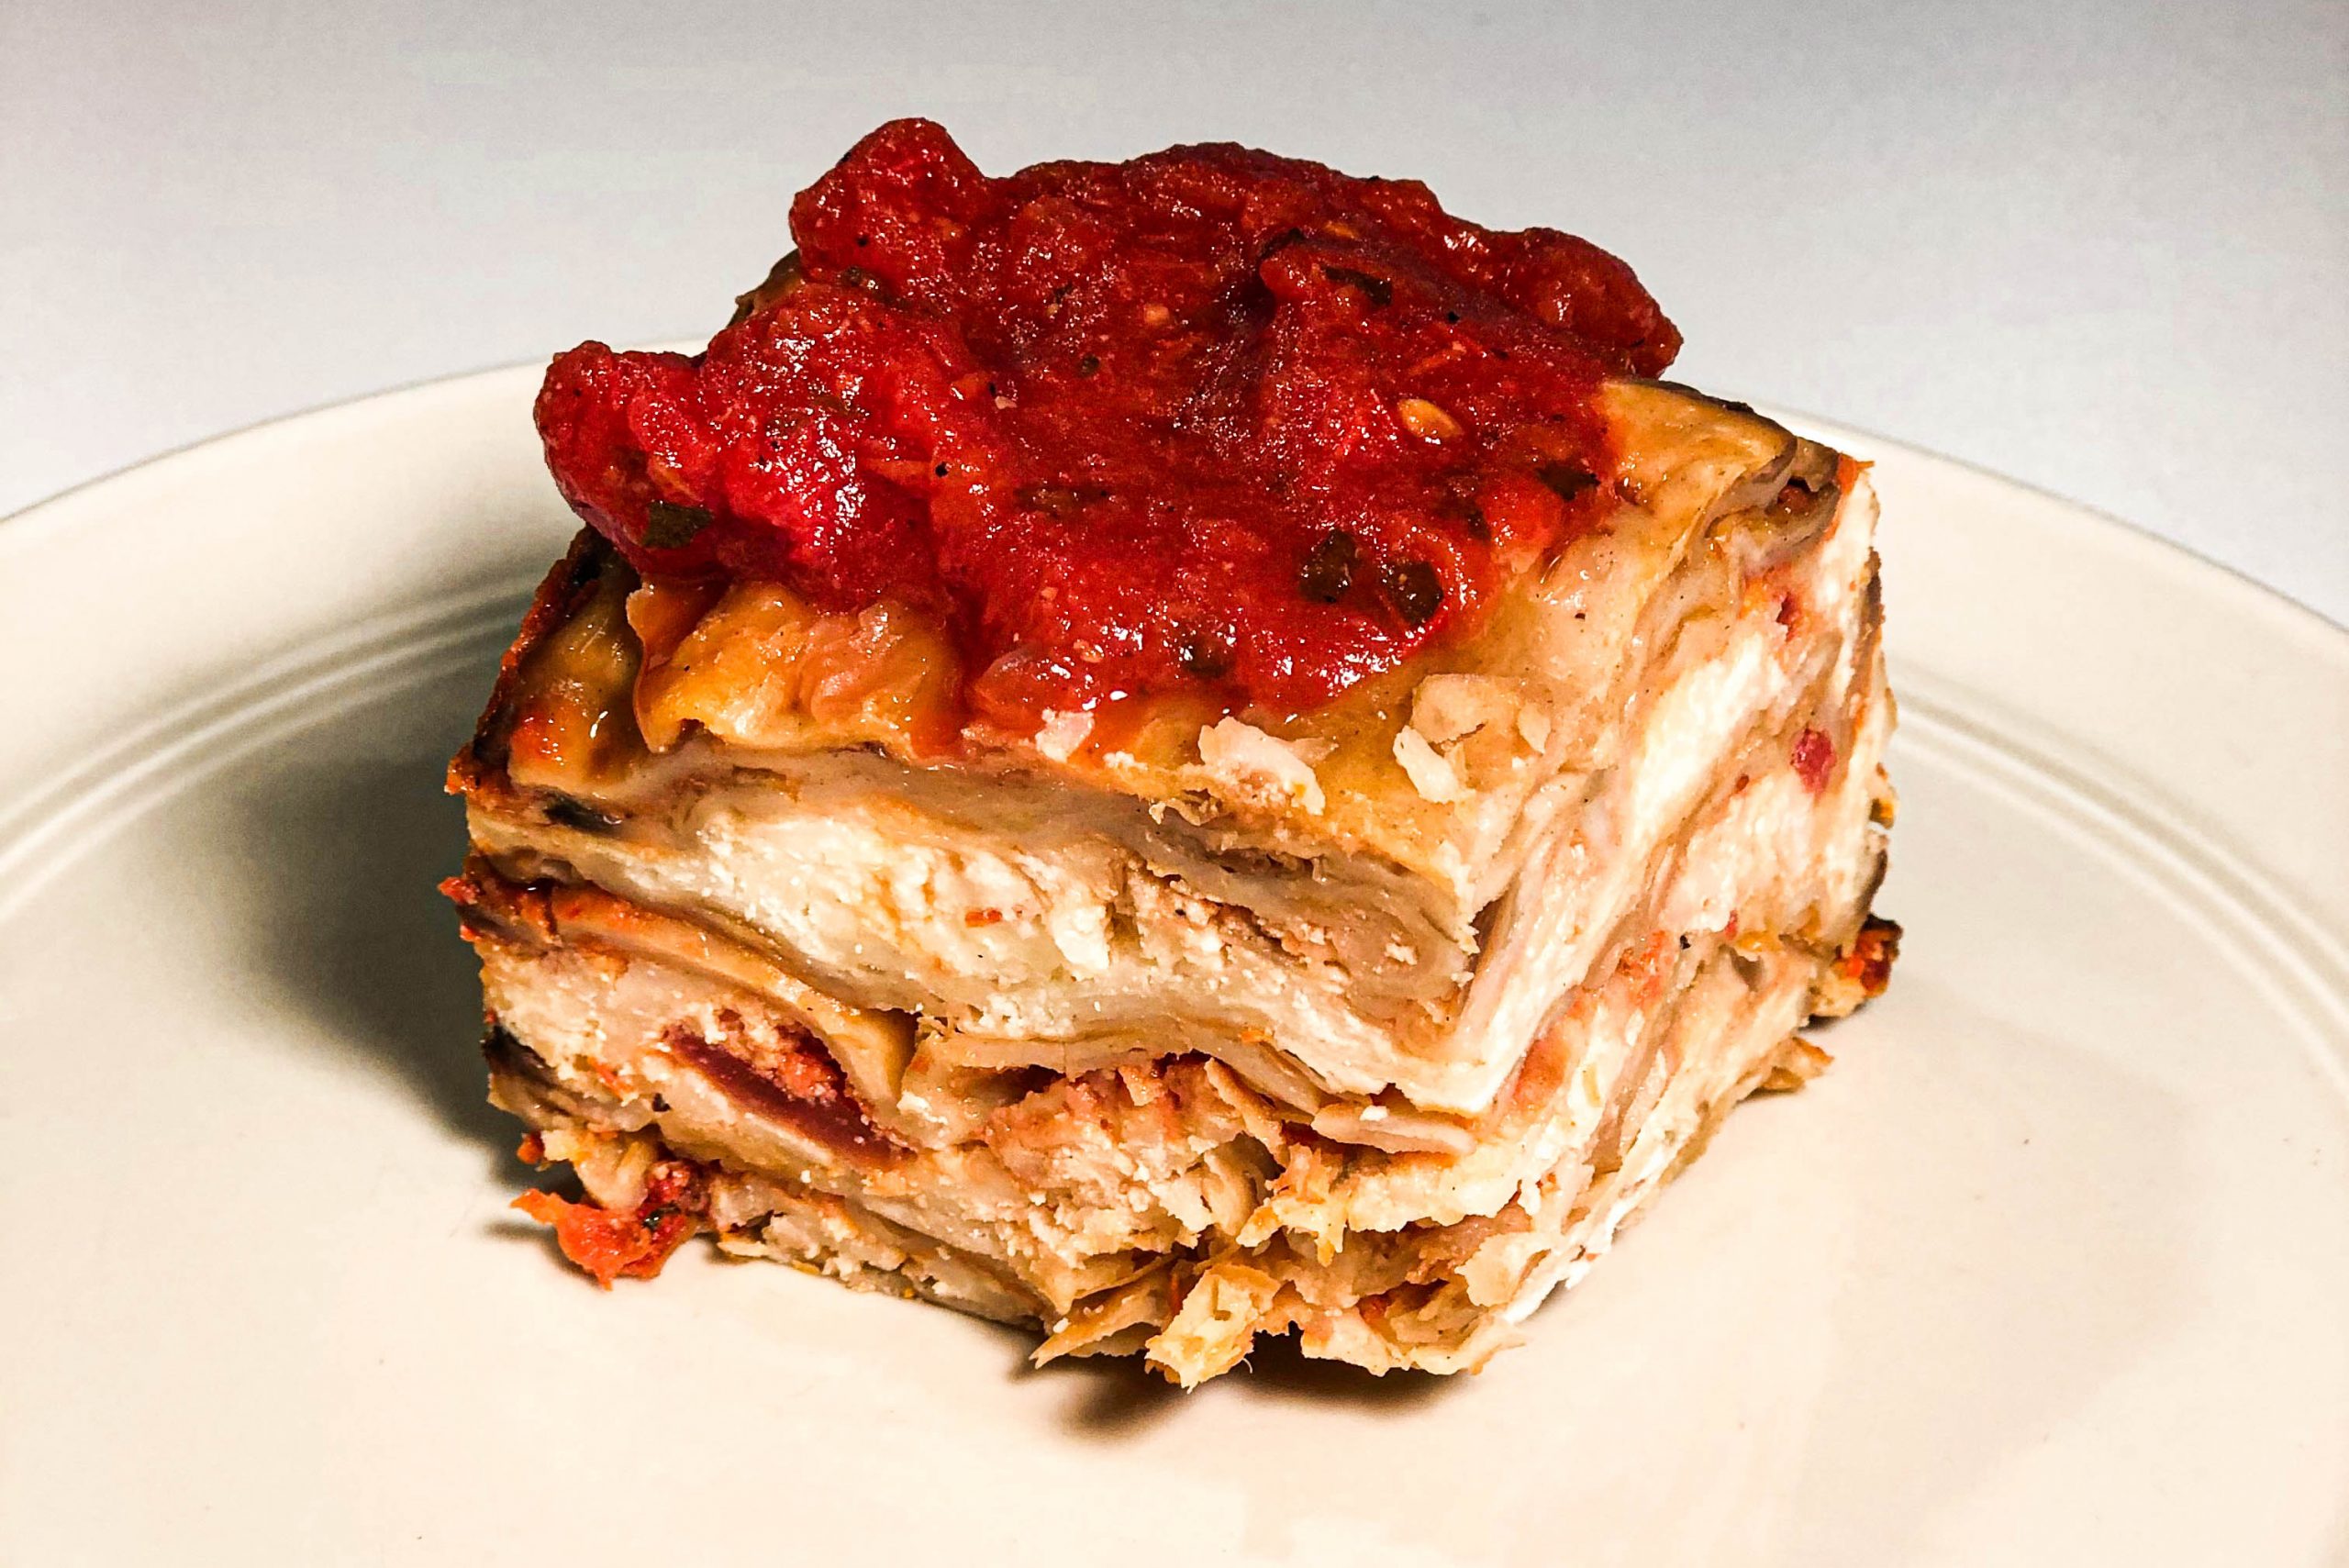 LASAGNA di PANE AZZIMO: CHEF TALK and COOKING PROGRAM on Italian Style Passover Matzah Pie with Crushed Tomatoes, Basil, and Pot Cheese